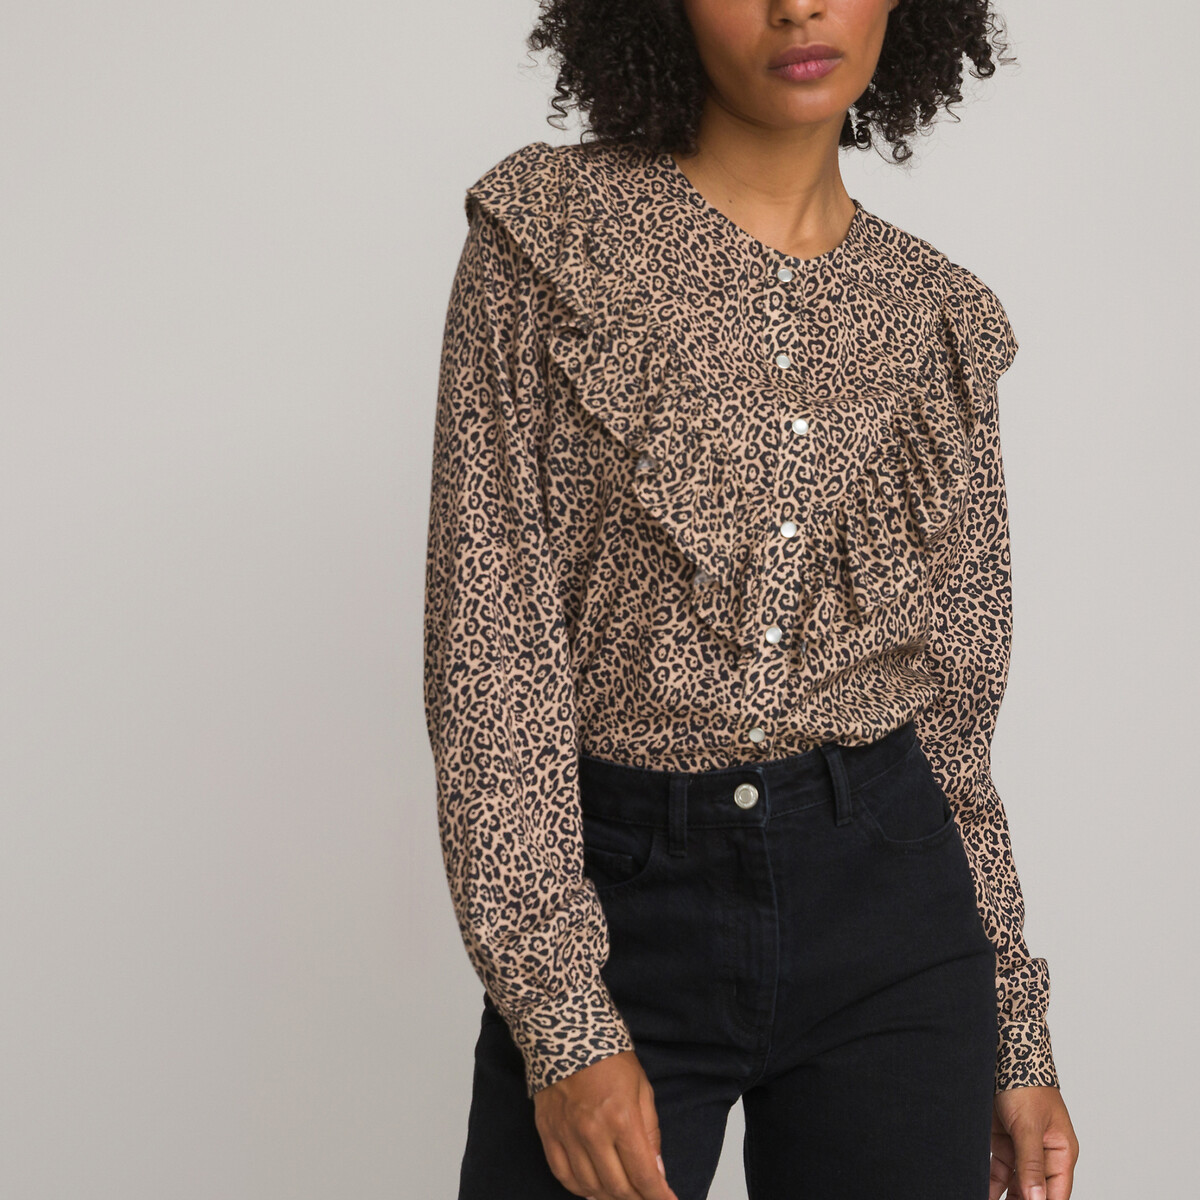 Leopard Print Cotton Blouse with Ruffle and Long Sleeves